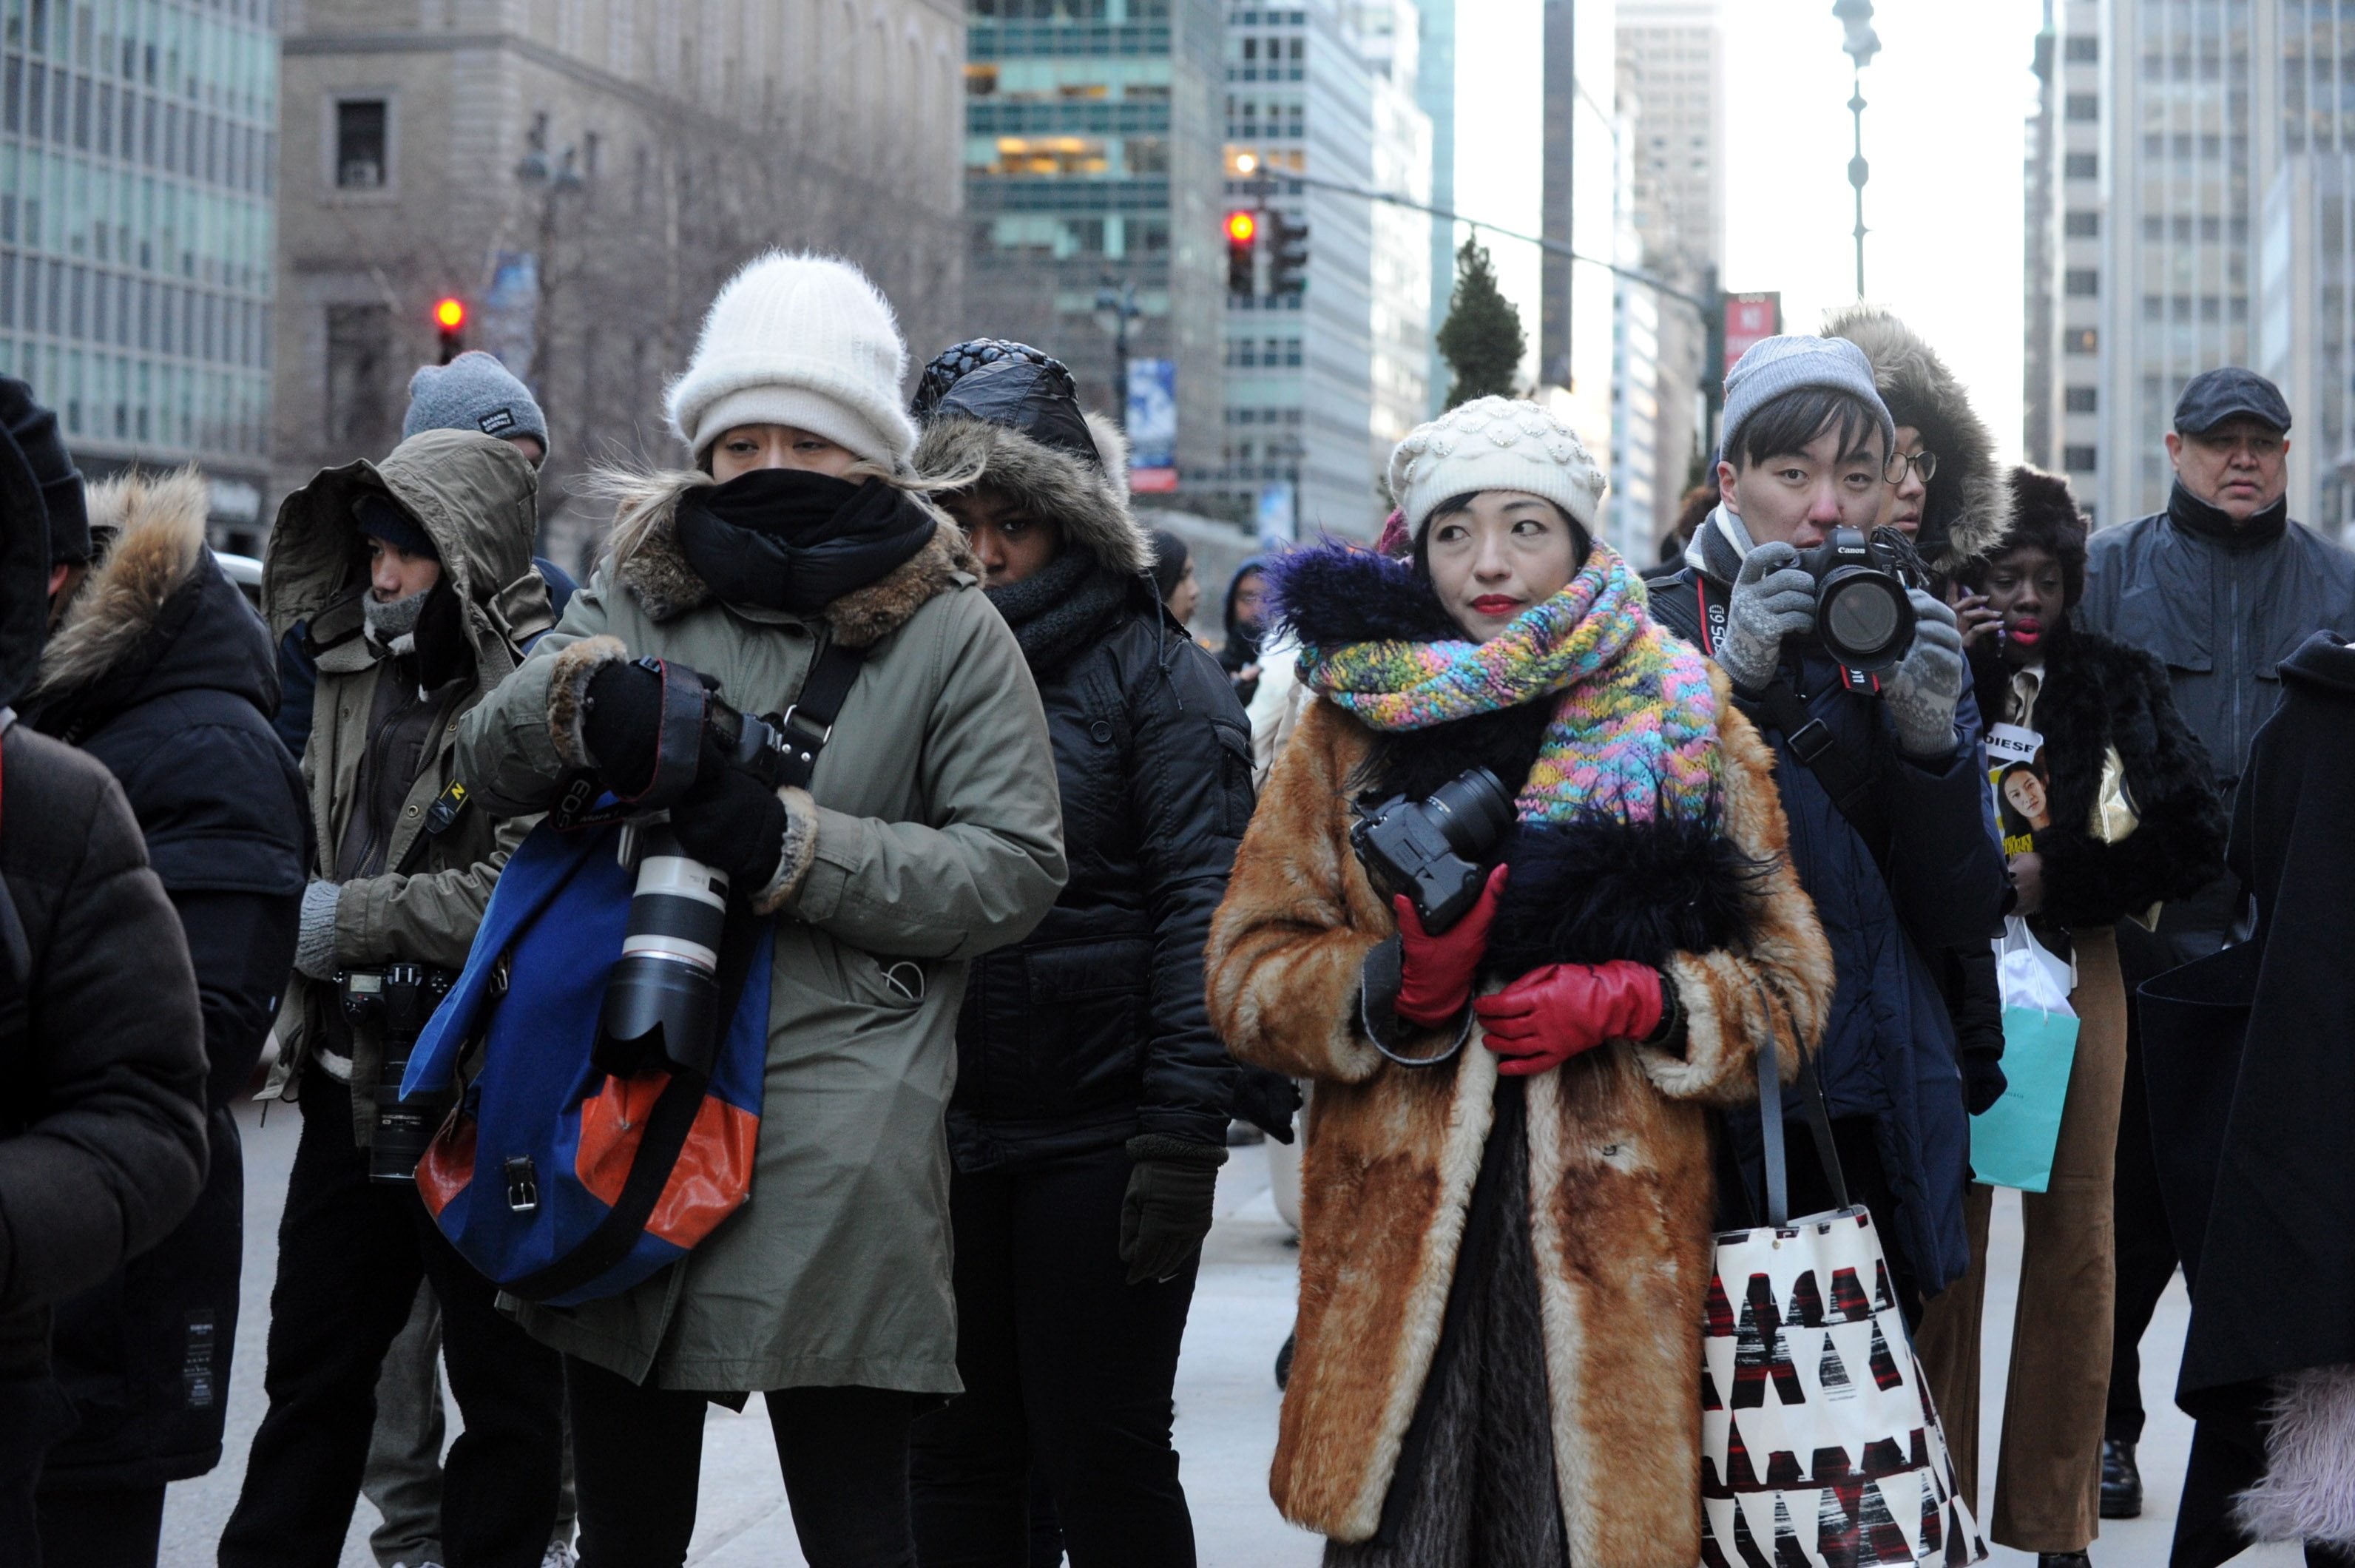 Street photographers brave the cold to photograph guests arriving to the Alexander Wang Fall 2016 show during Fashion Week, Saturday, Feb. 13, 2016, in New York. With temperatures continuing to drop throughout the day Saturday, Mayor Bill de Blasio urged New Yorkers to stay safe and warm by limiting time outdoors, reporting heat and hot water conditions to 311, and checking in on vulnerable friends, relatives and neighbors.